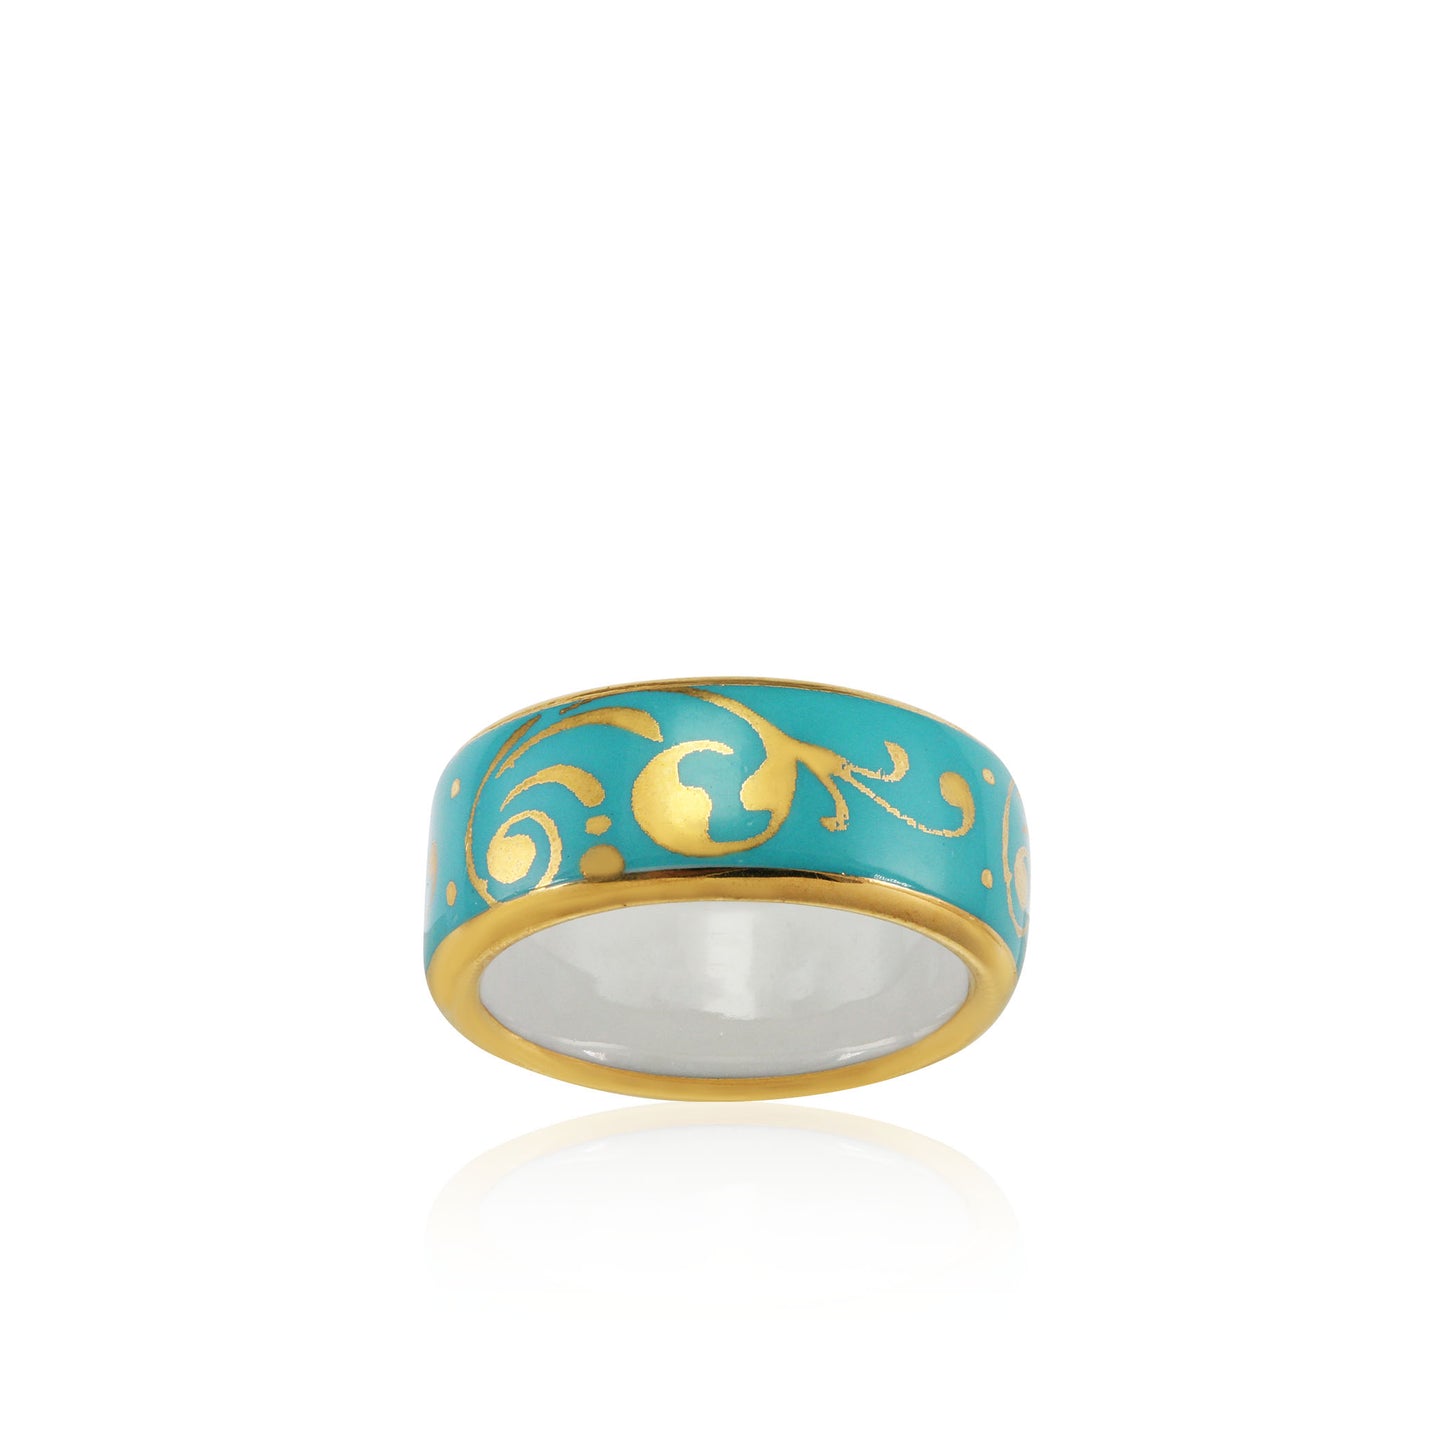 BAROQUE mint green gold plated fine porcelain ring